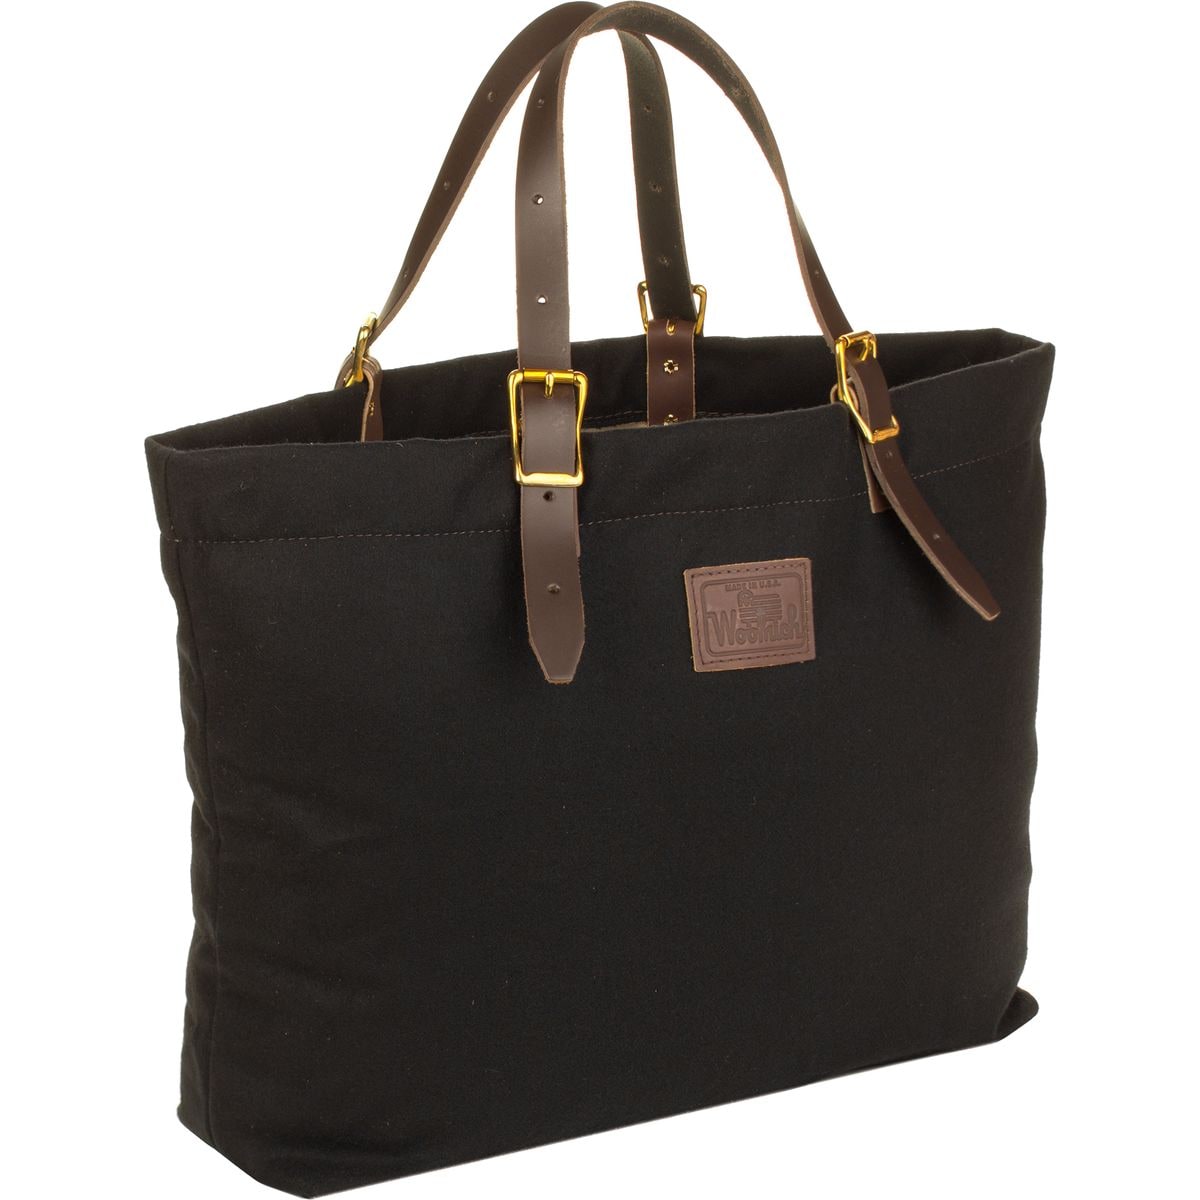 Woolrich x Frost River Shoulder Tote - Accessories